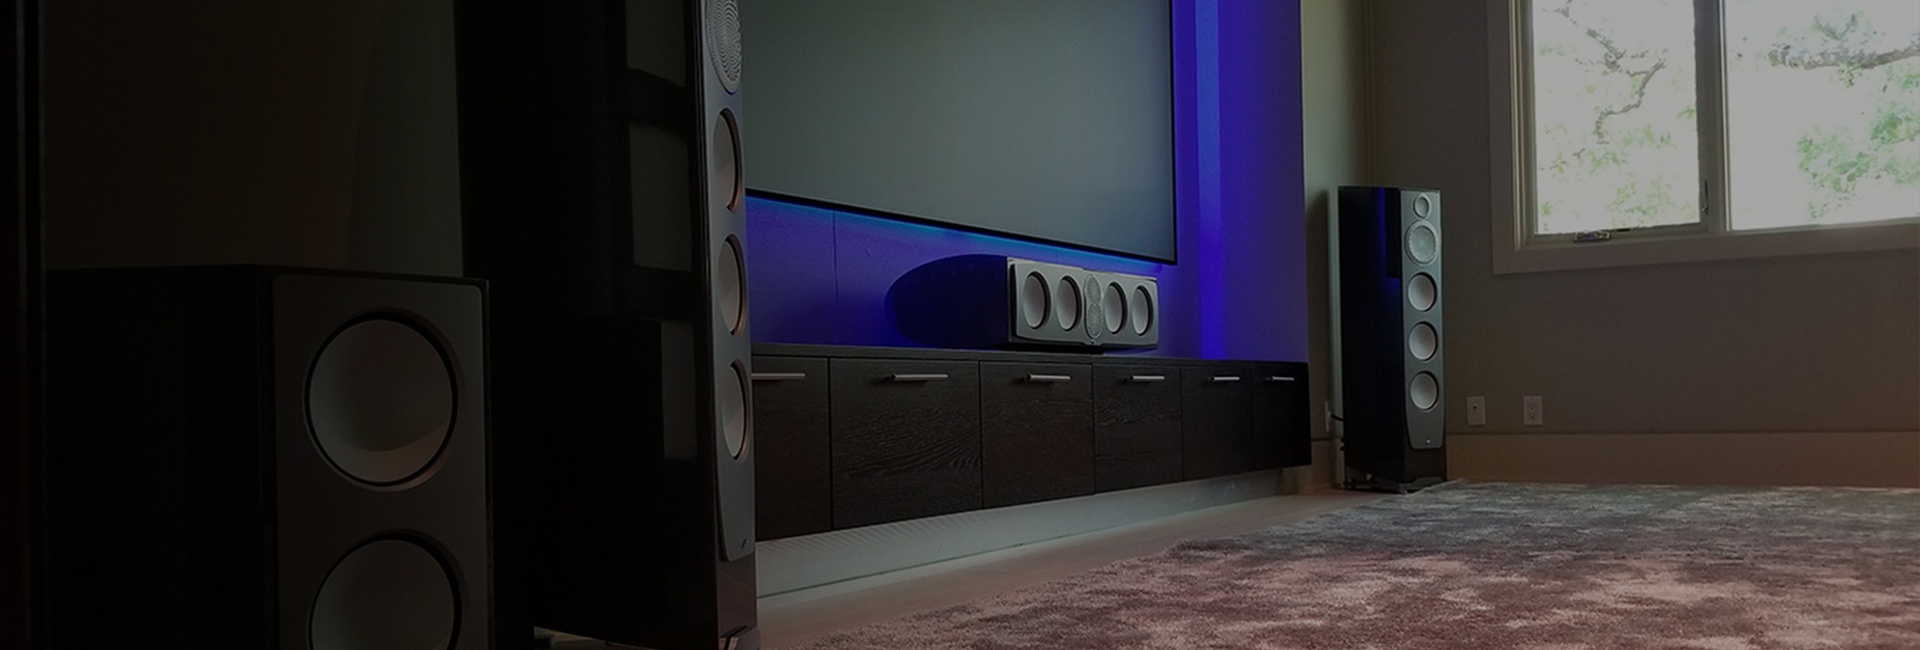 Home Audio and Video Distribution Systems by Audio Experts at AV Connect in Austin, Texas